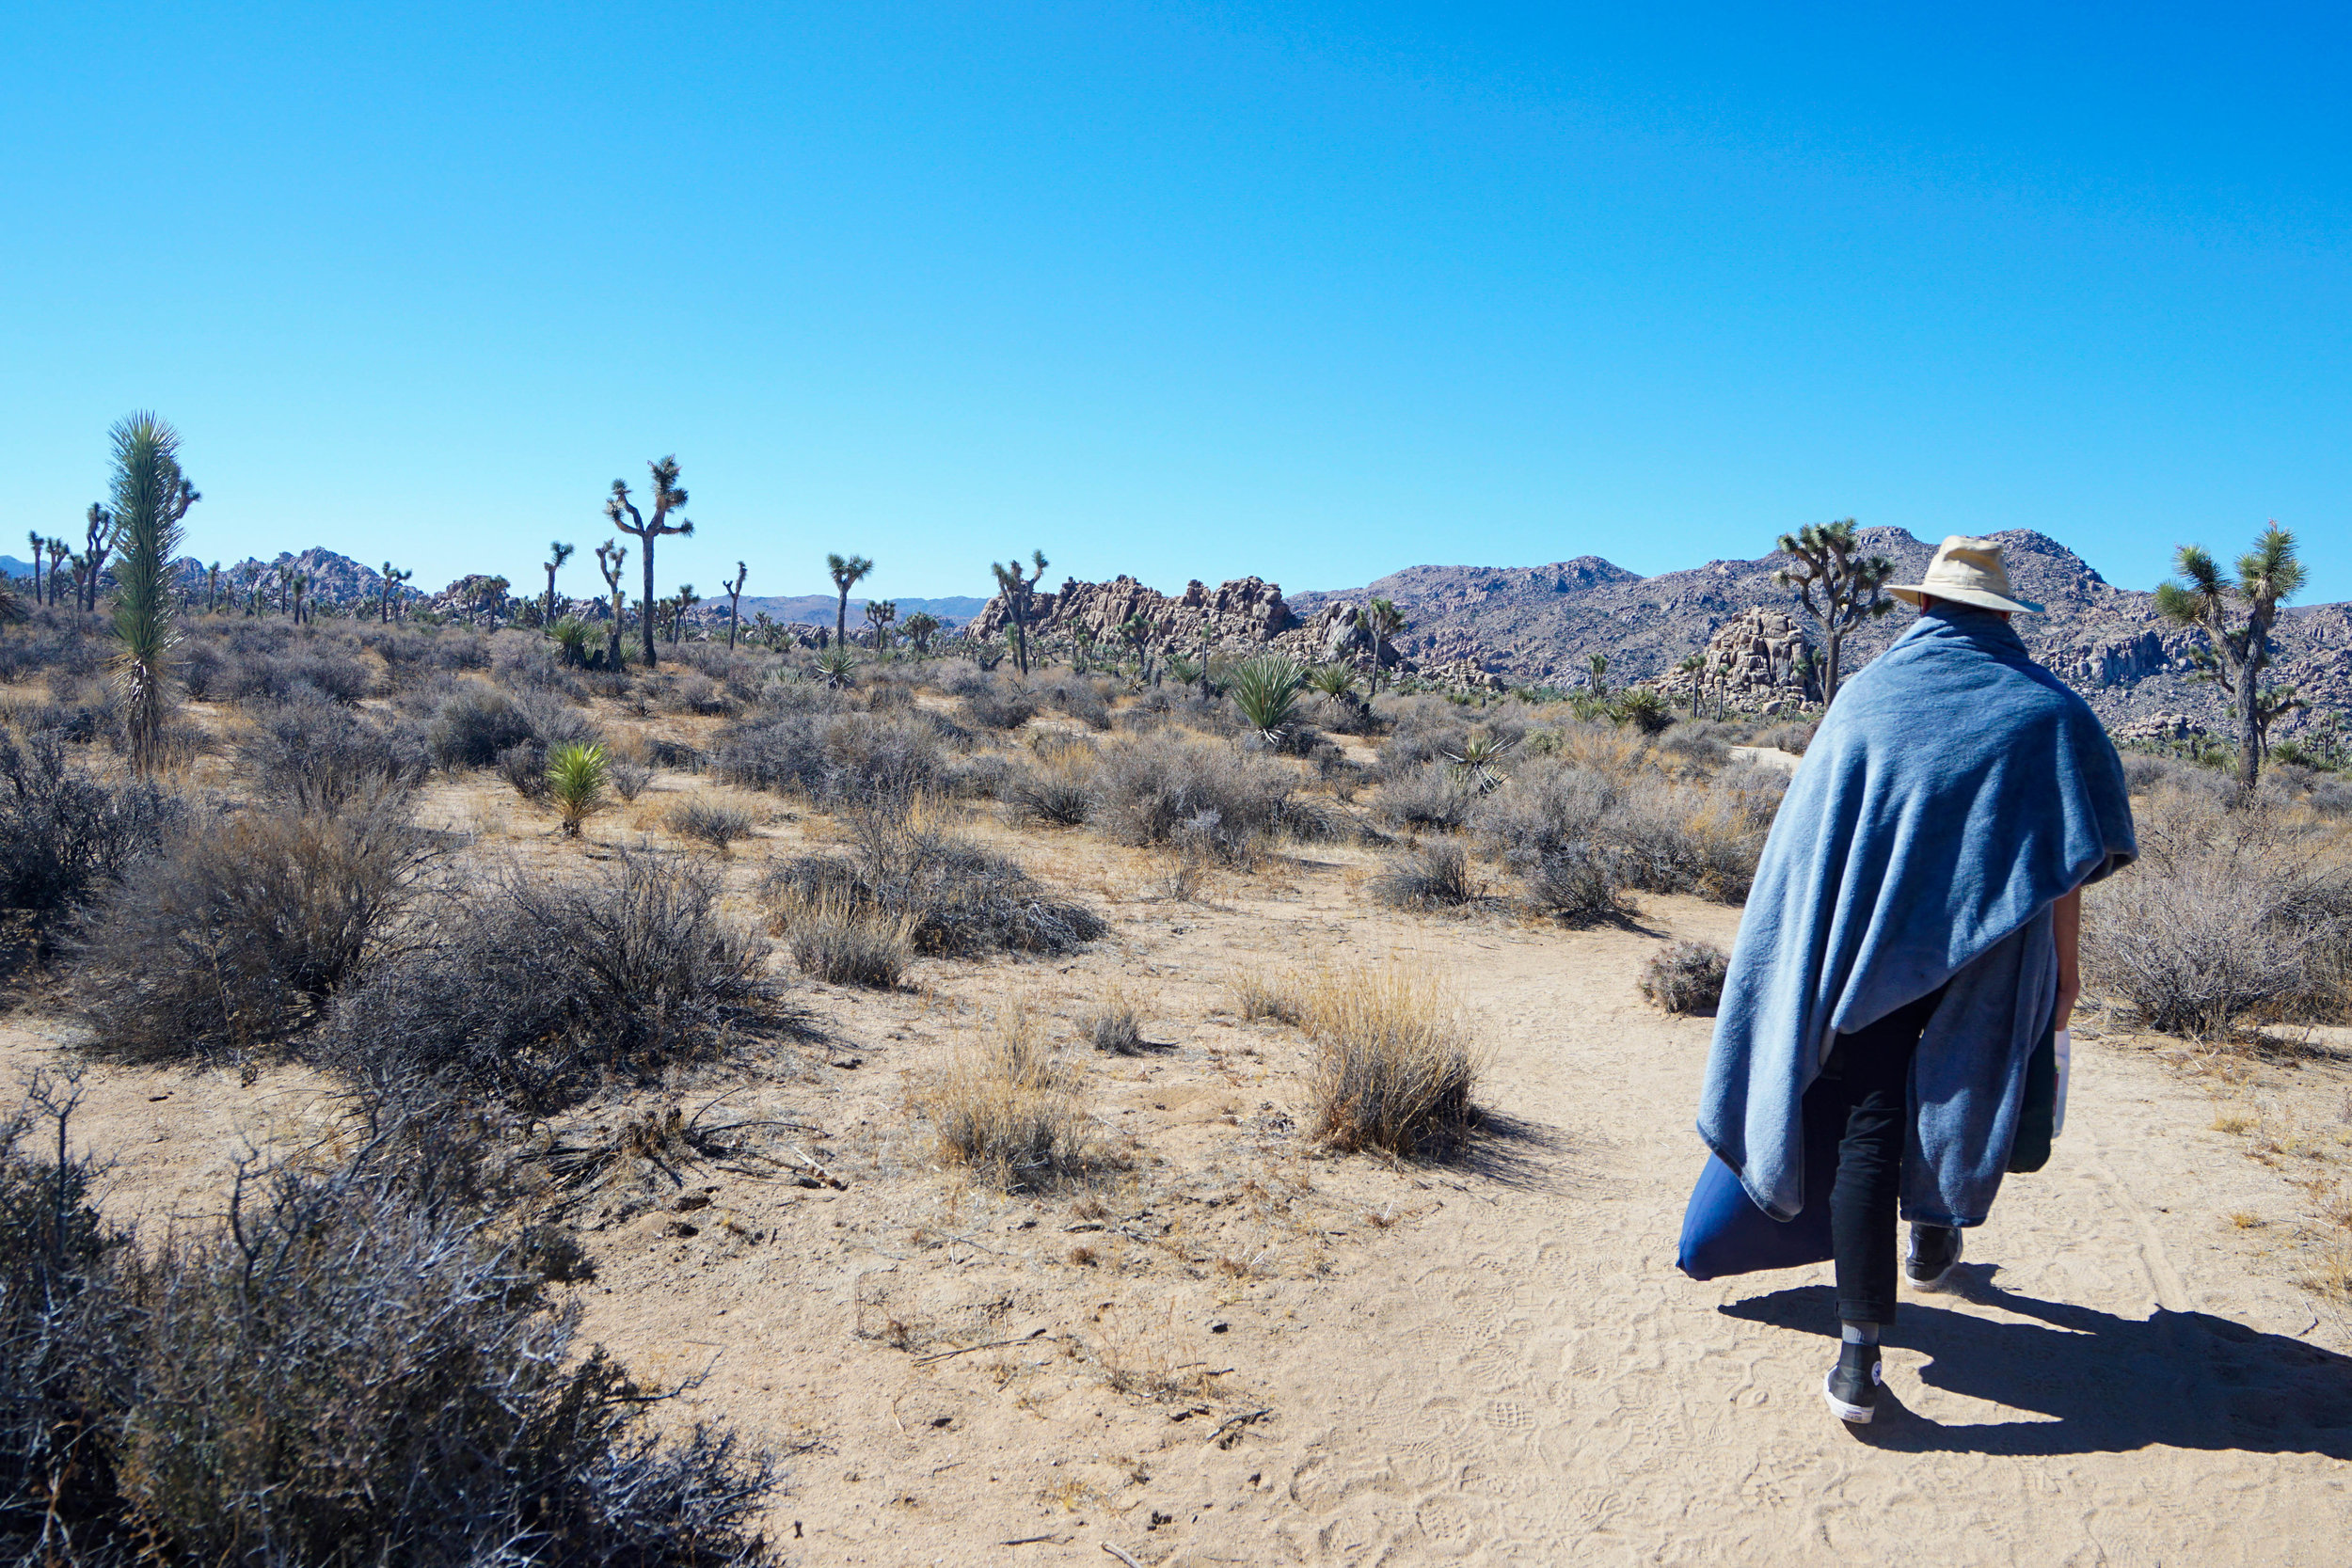 Led by el bandito & his blanket poncho we journey a mile back to the car to drop off the gear prior to a mid day hike.  